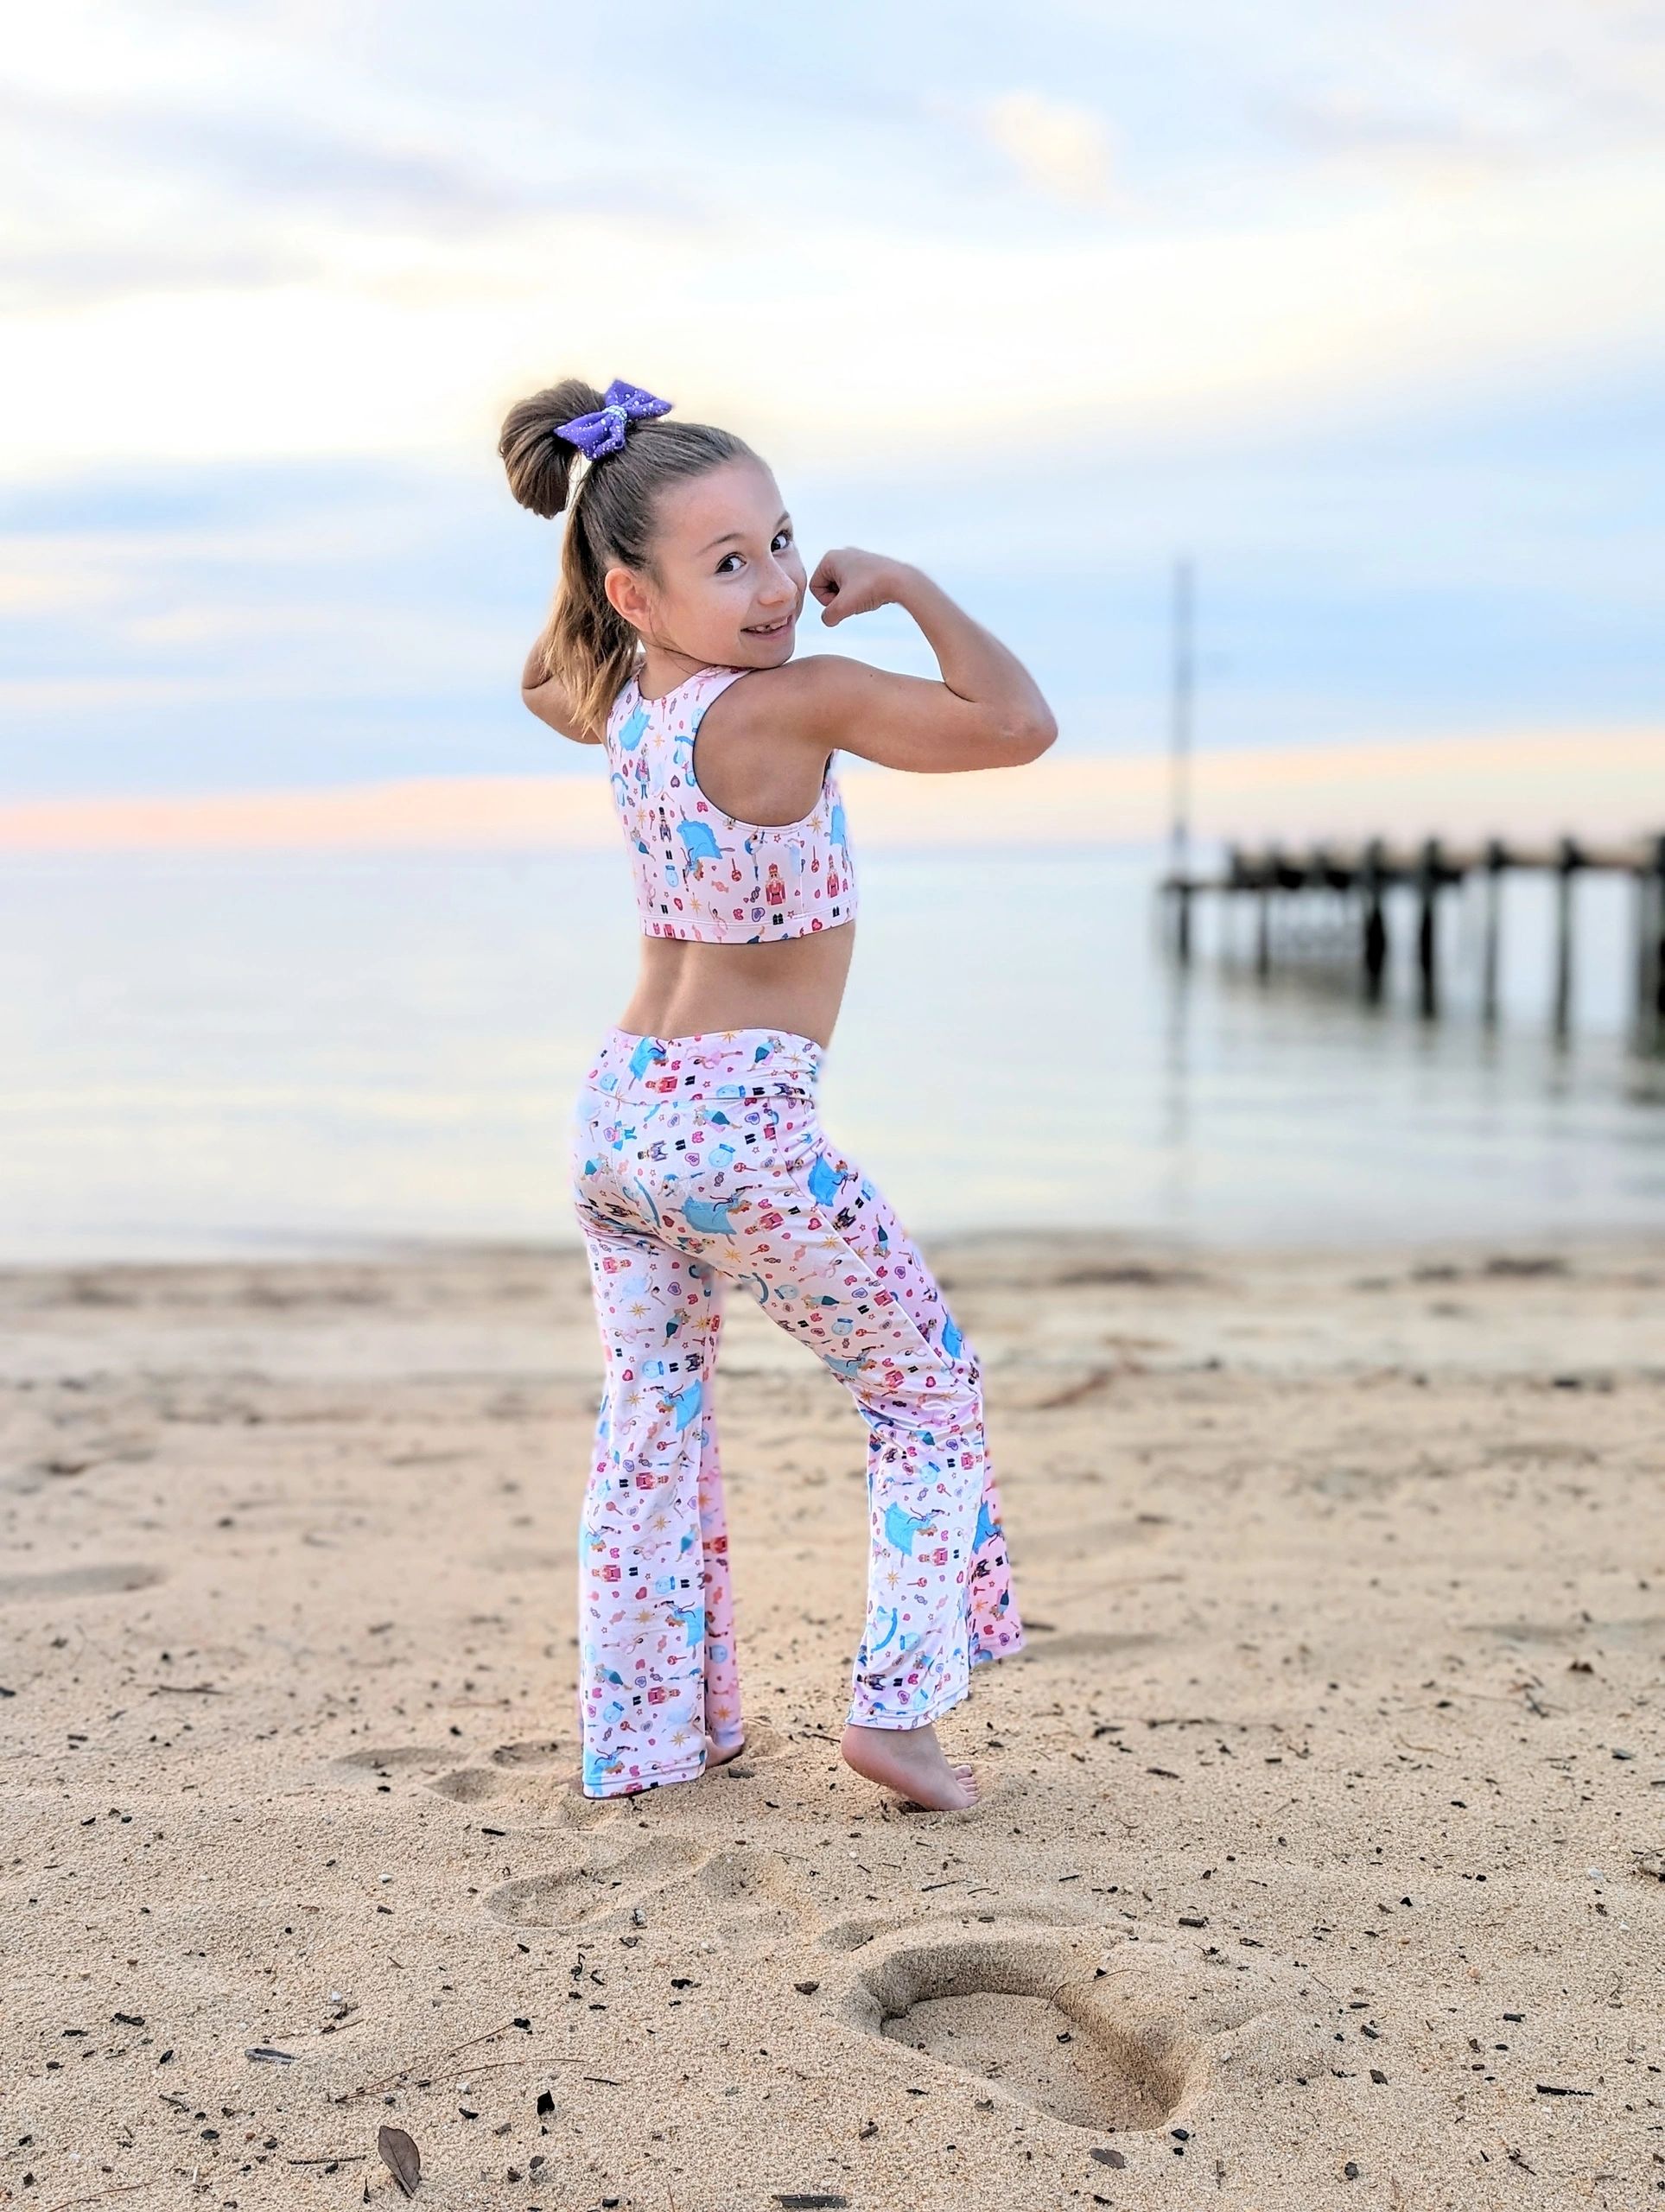 Girls Two Piece Athletic Outfit Crop Top with Pants for Gymnastics Dance  Sports